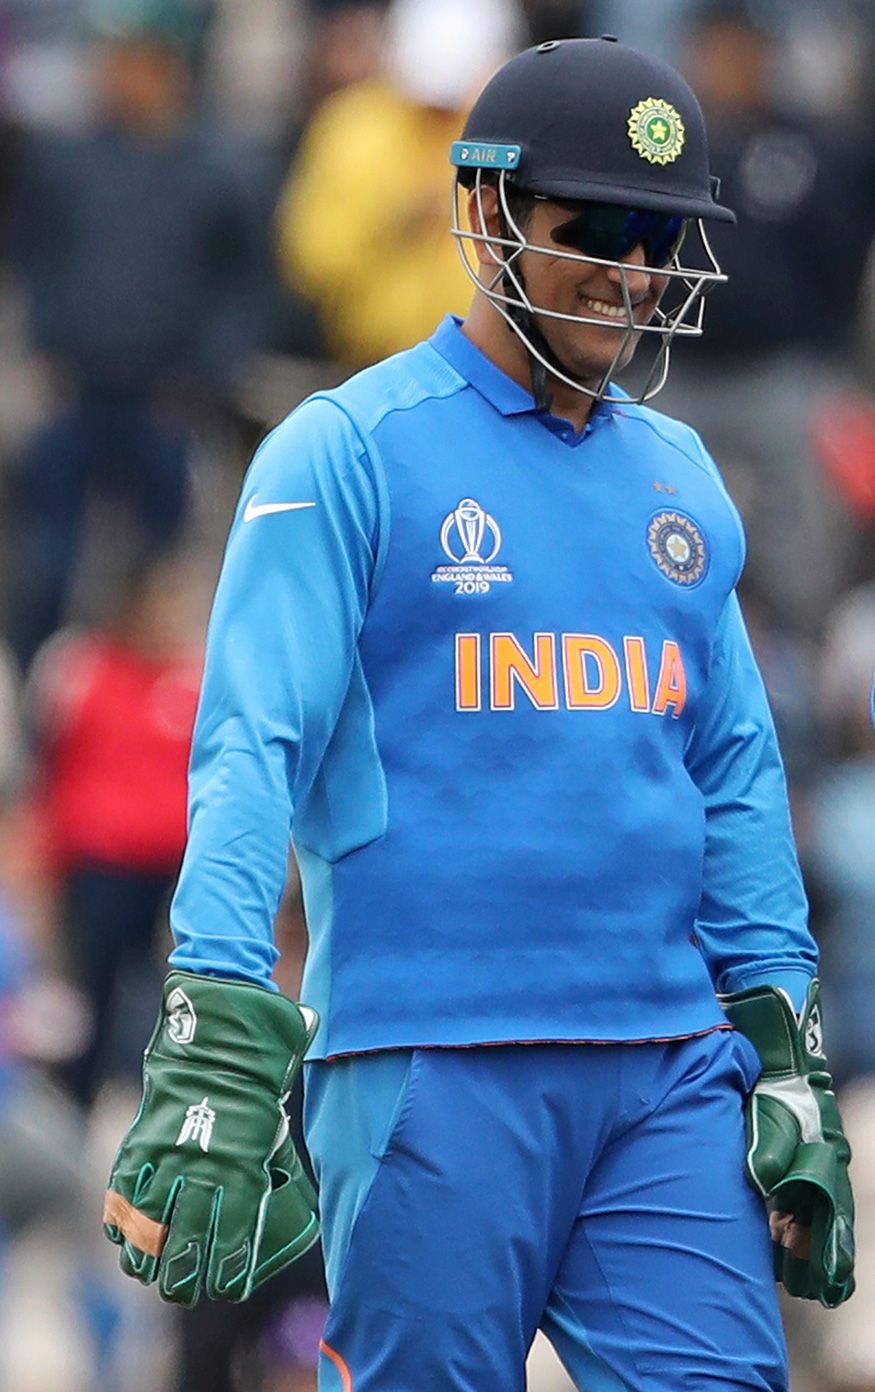 Ms Dhoni Smiles After The Dismissal Of A South African Dhoni Helmet Smiling